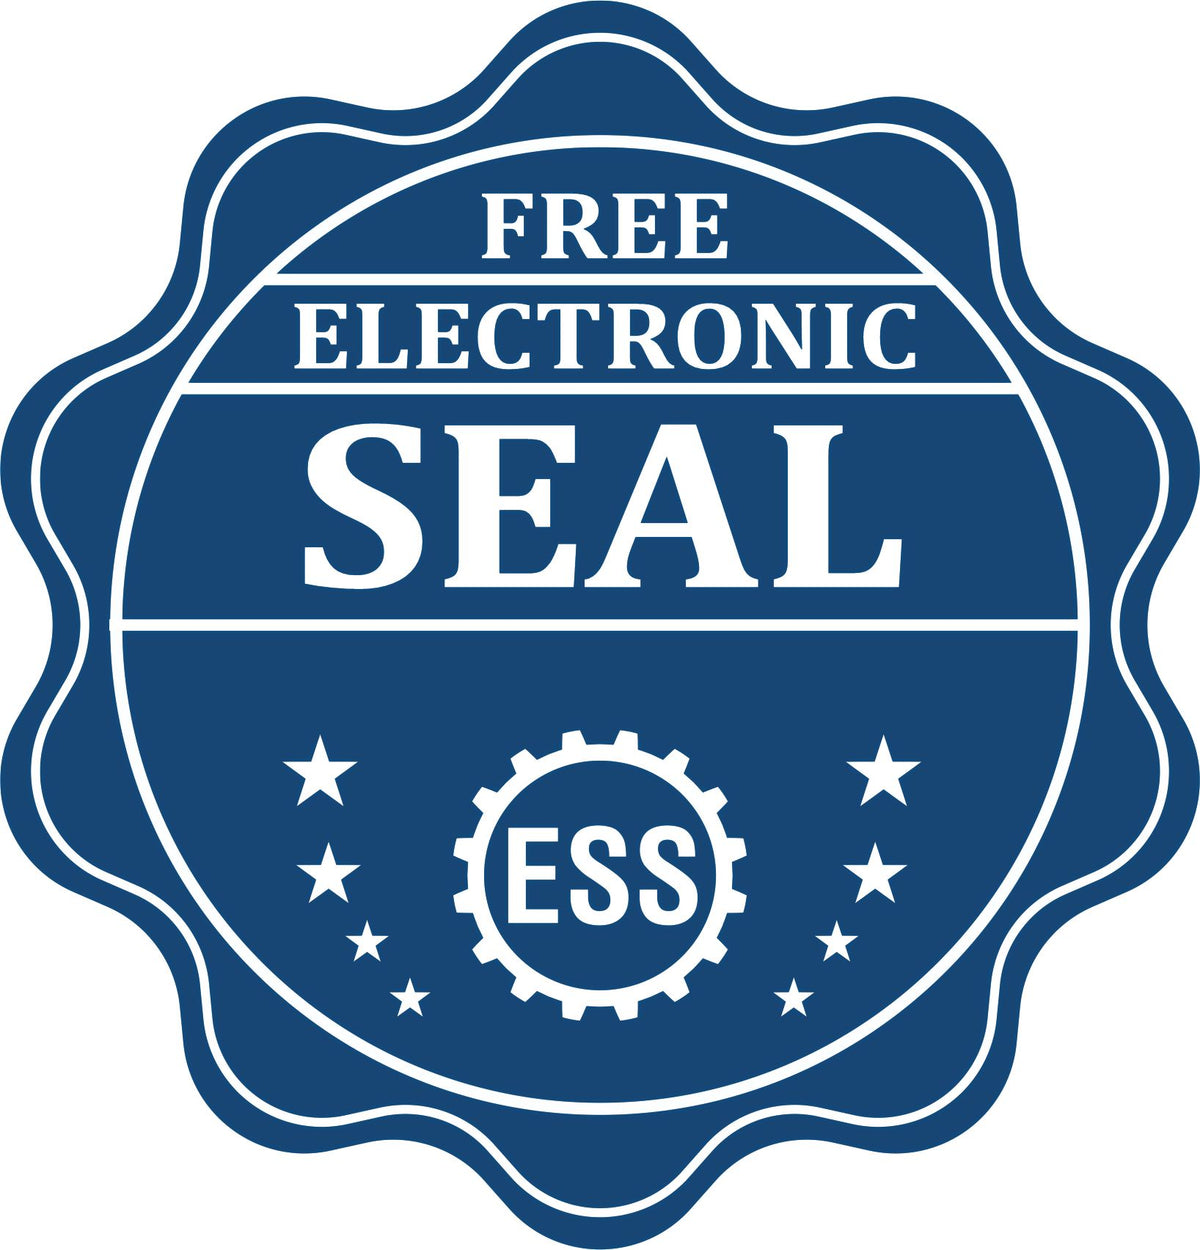 A badge showing a free electronic seal for the Soft Nevada Professional Engineer Seal with stars and the ESS gear on the emblem.